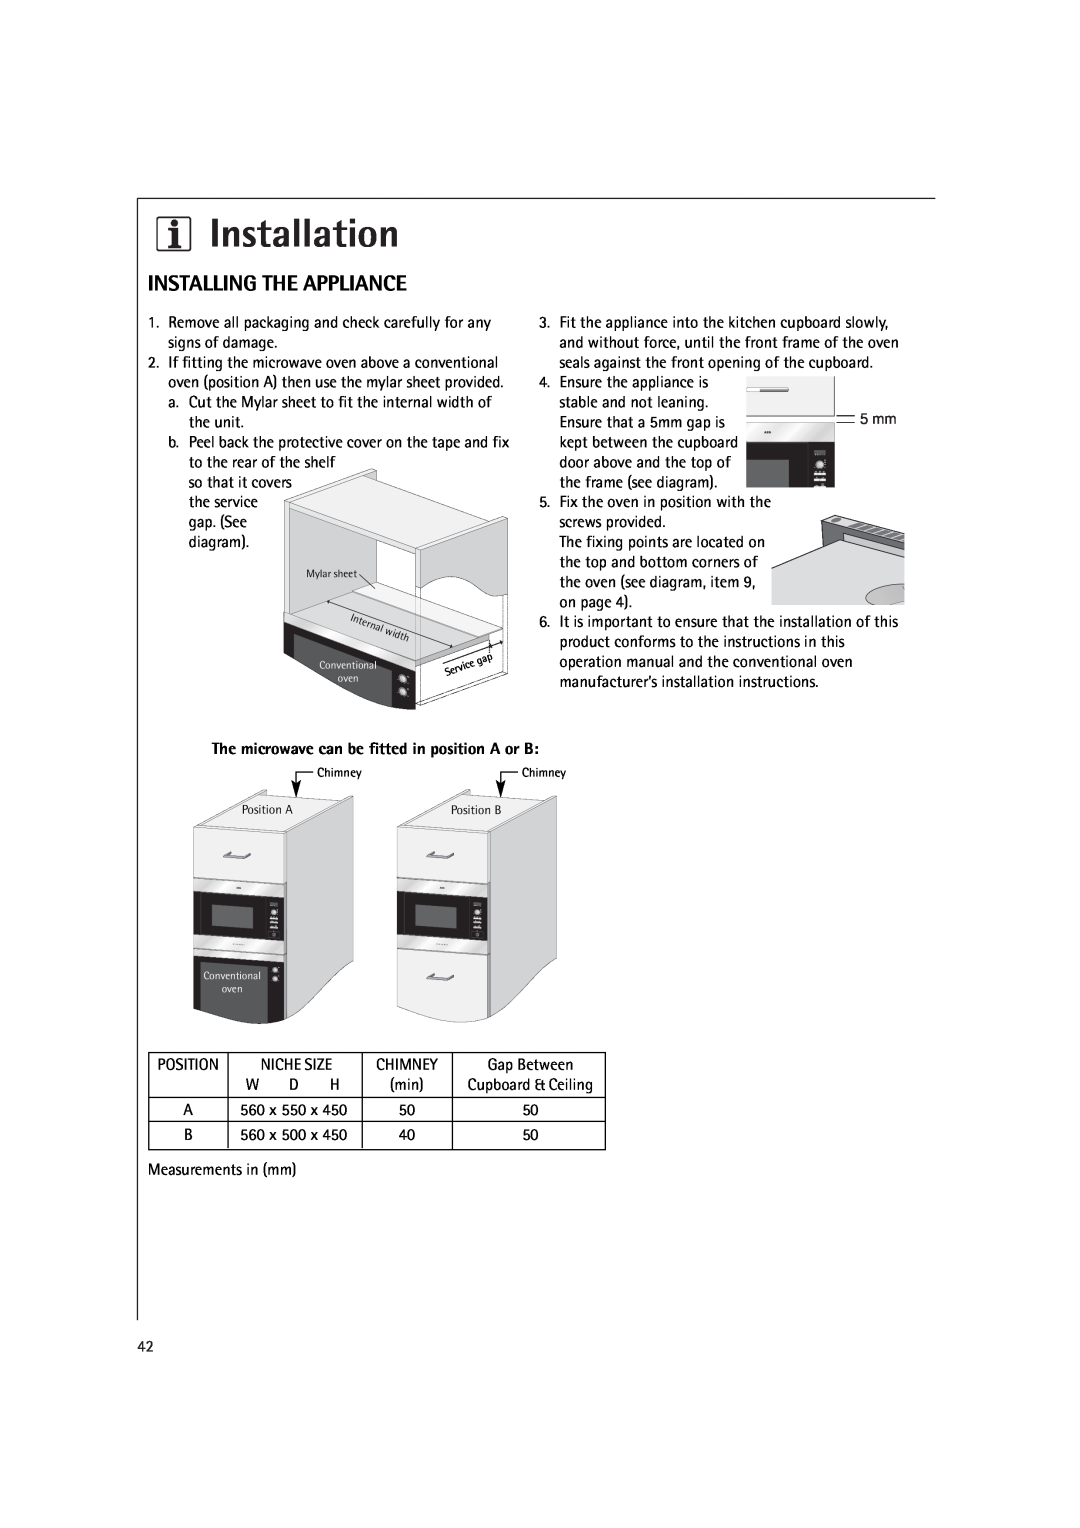 AEG MC2660E operating instructions Installation, Installing The Appliance, The microwave can be fitted in position A or B 